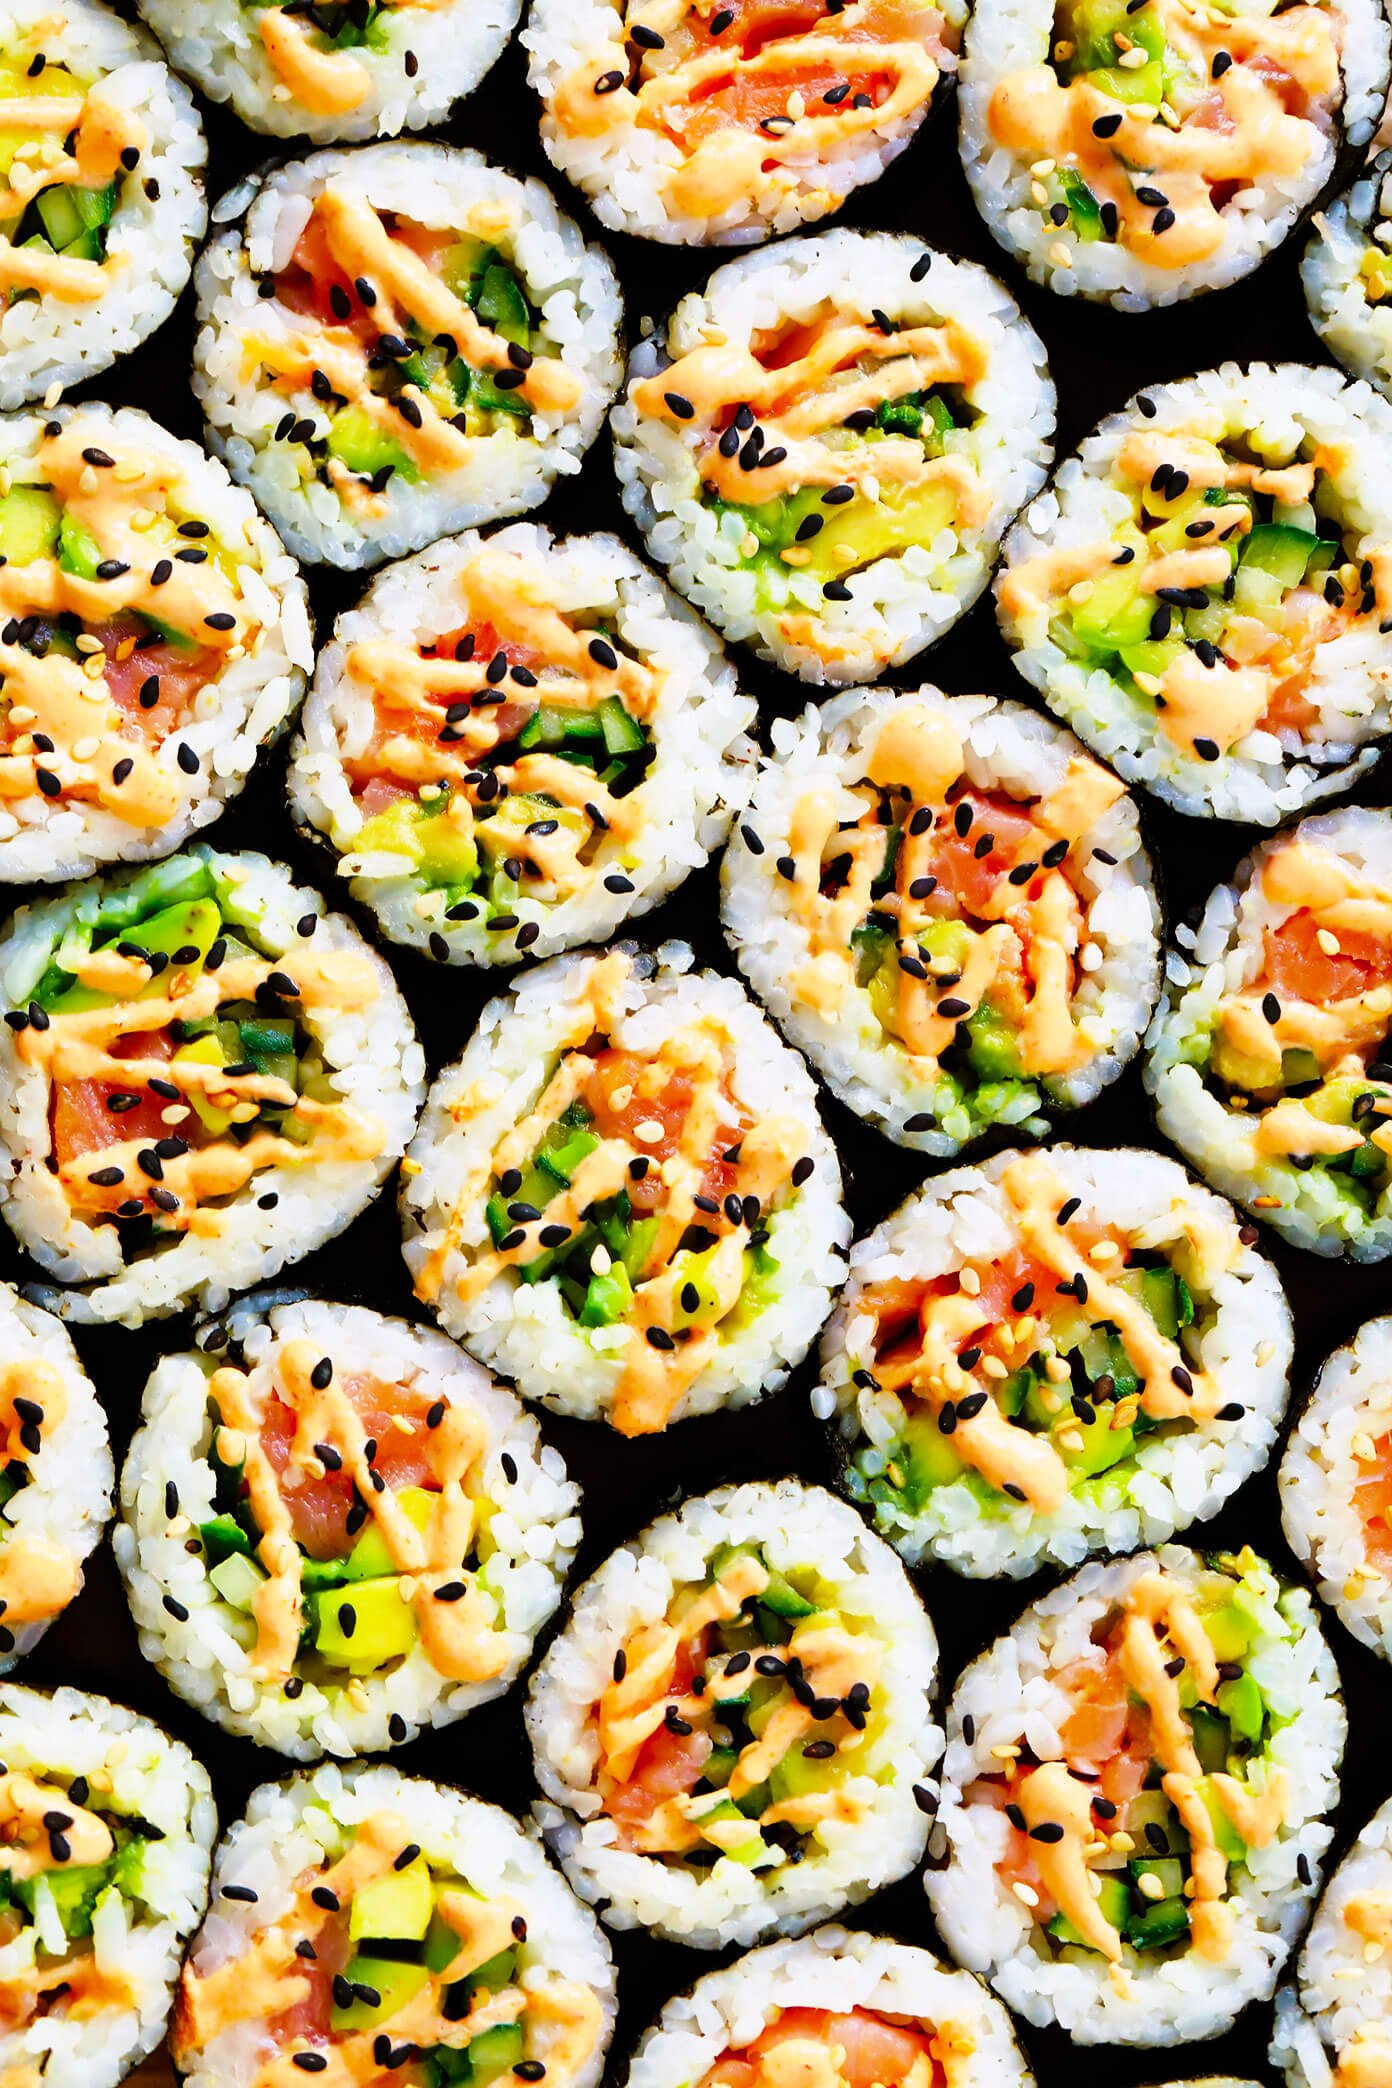 Salmon Avocado Sushi Rolls with Spicy Sauce